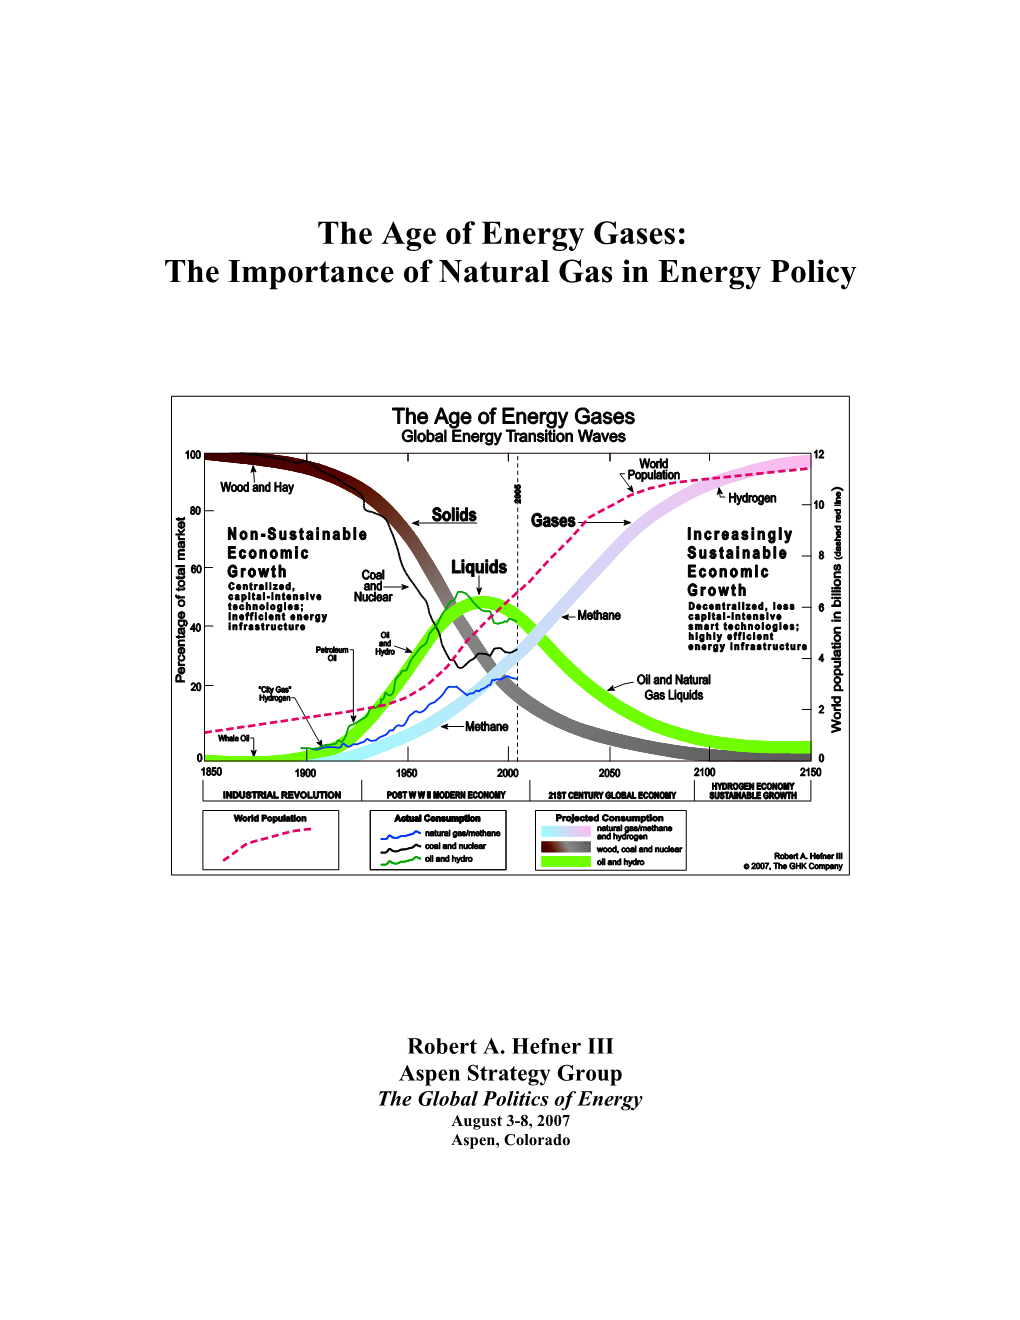 The Age of Energy Gases